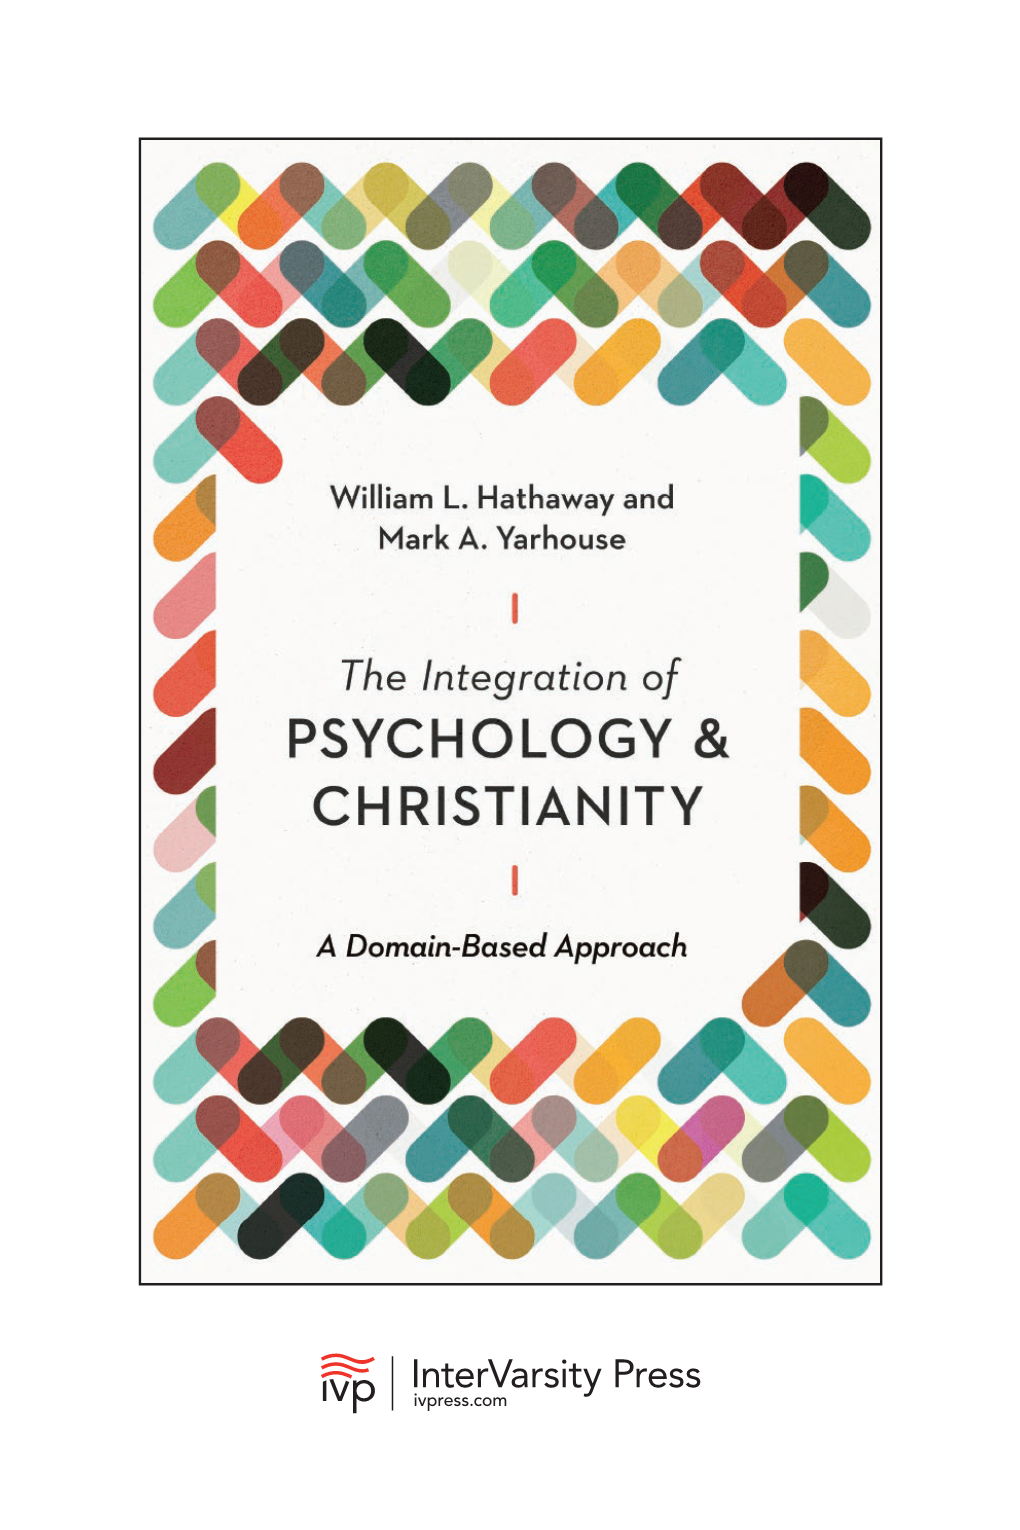 Integration of Psychology and Christianity by William L